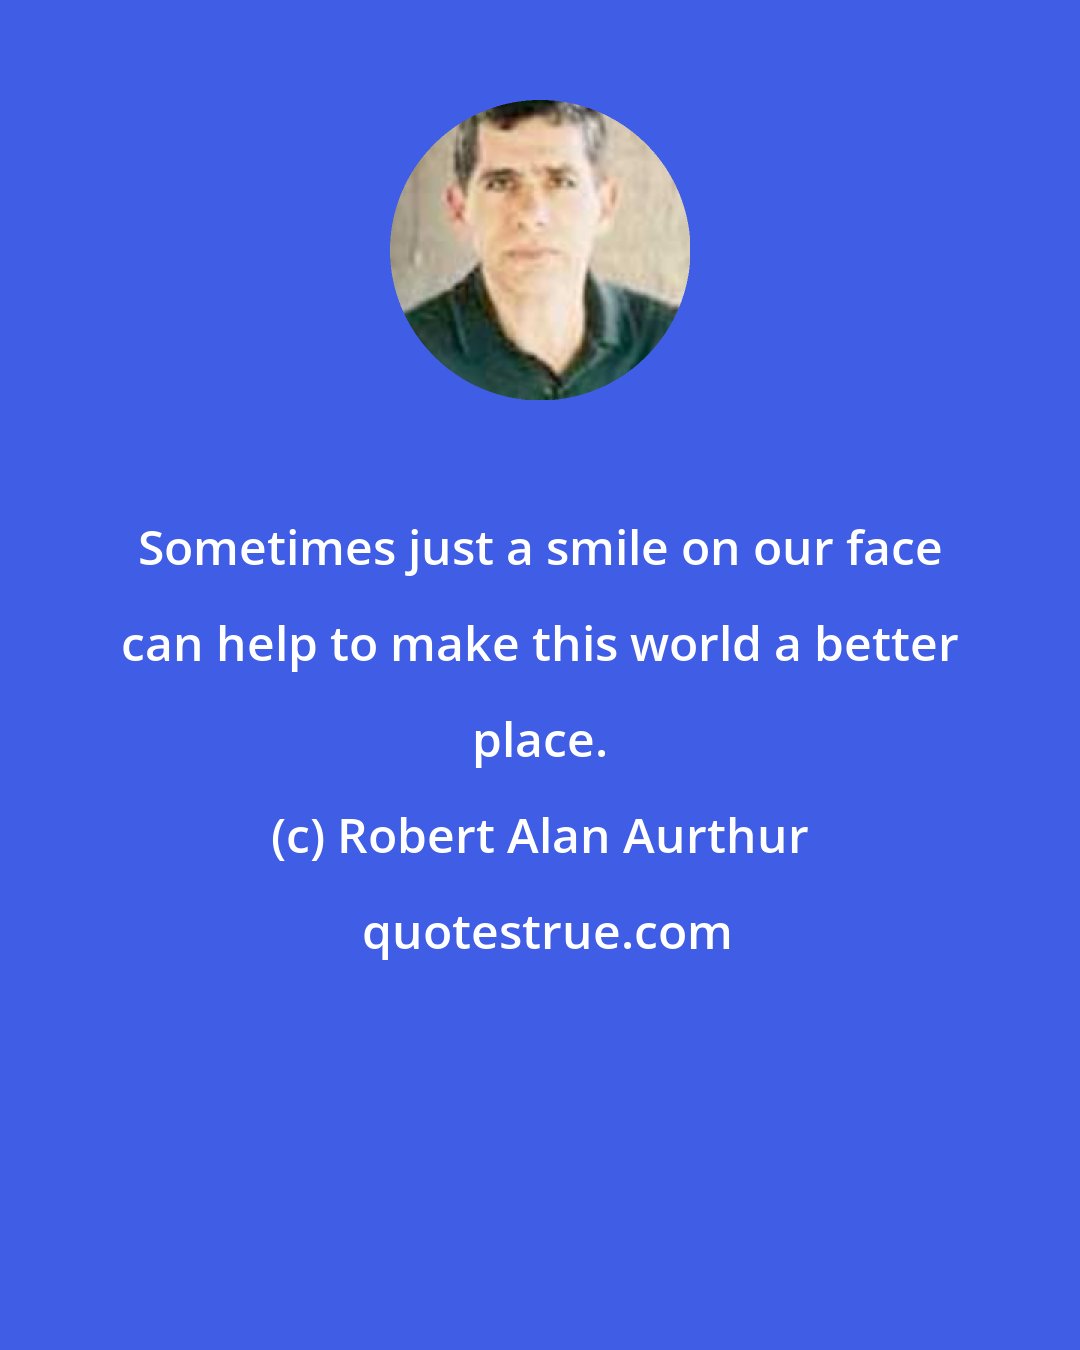 Robert Alan Aurthur: Sometimes just a smile on our face can help to make this world a better place.